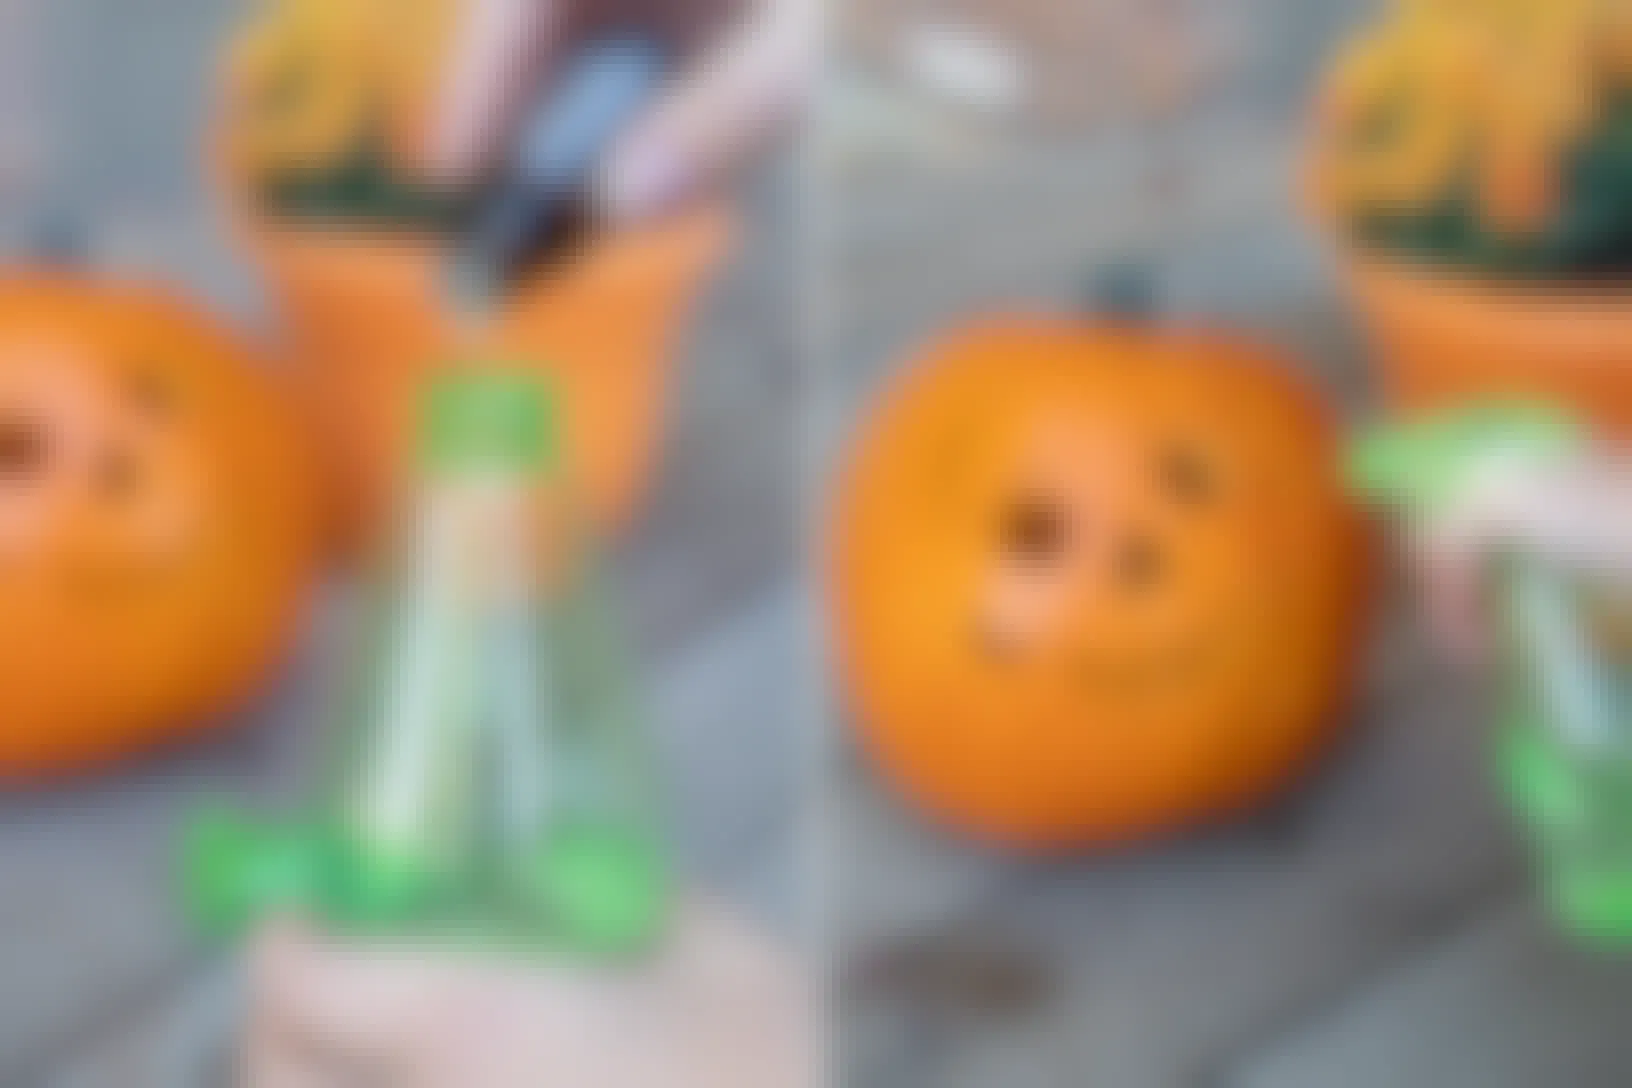 Person adding peppermint oil to a spray bottle and spraying a carved pumpkin